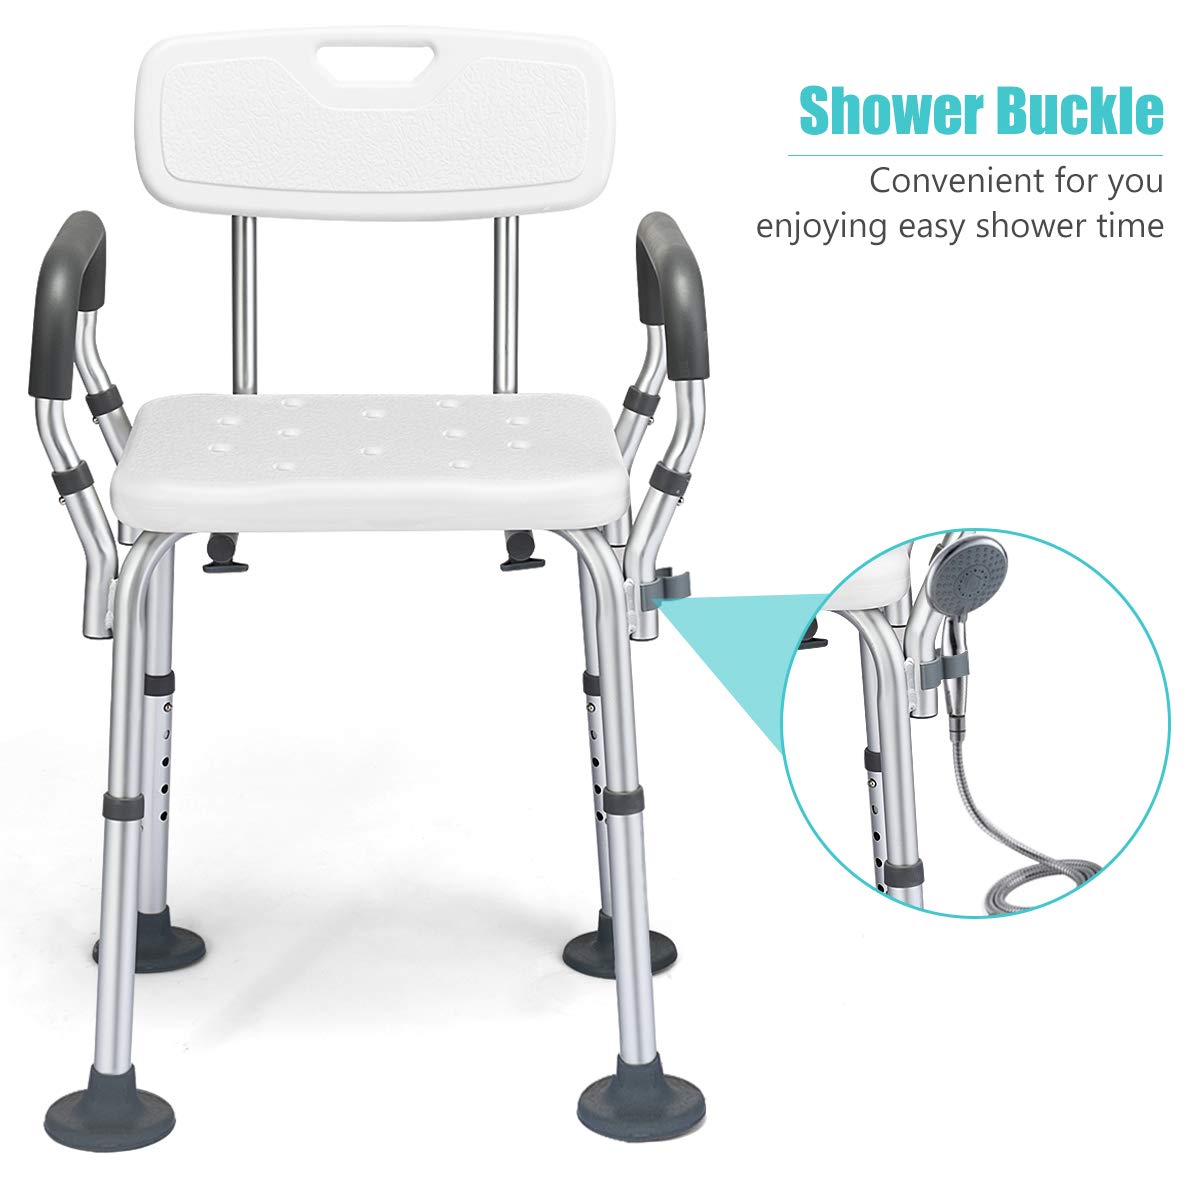 Giantex Shower Chair with Arms and Back Removable (21"x19"x32.5")